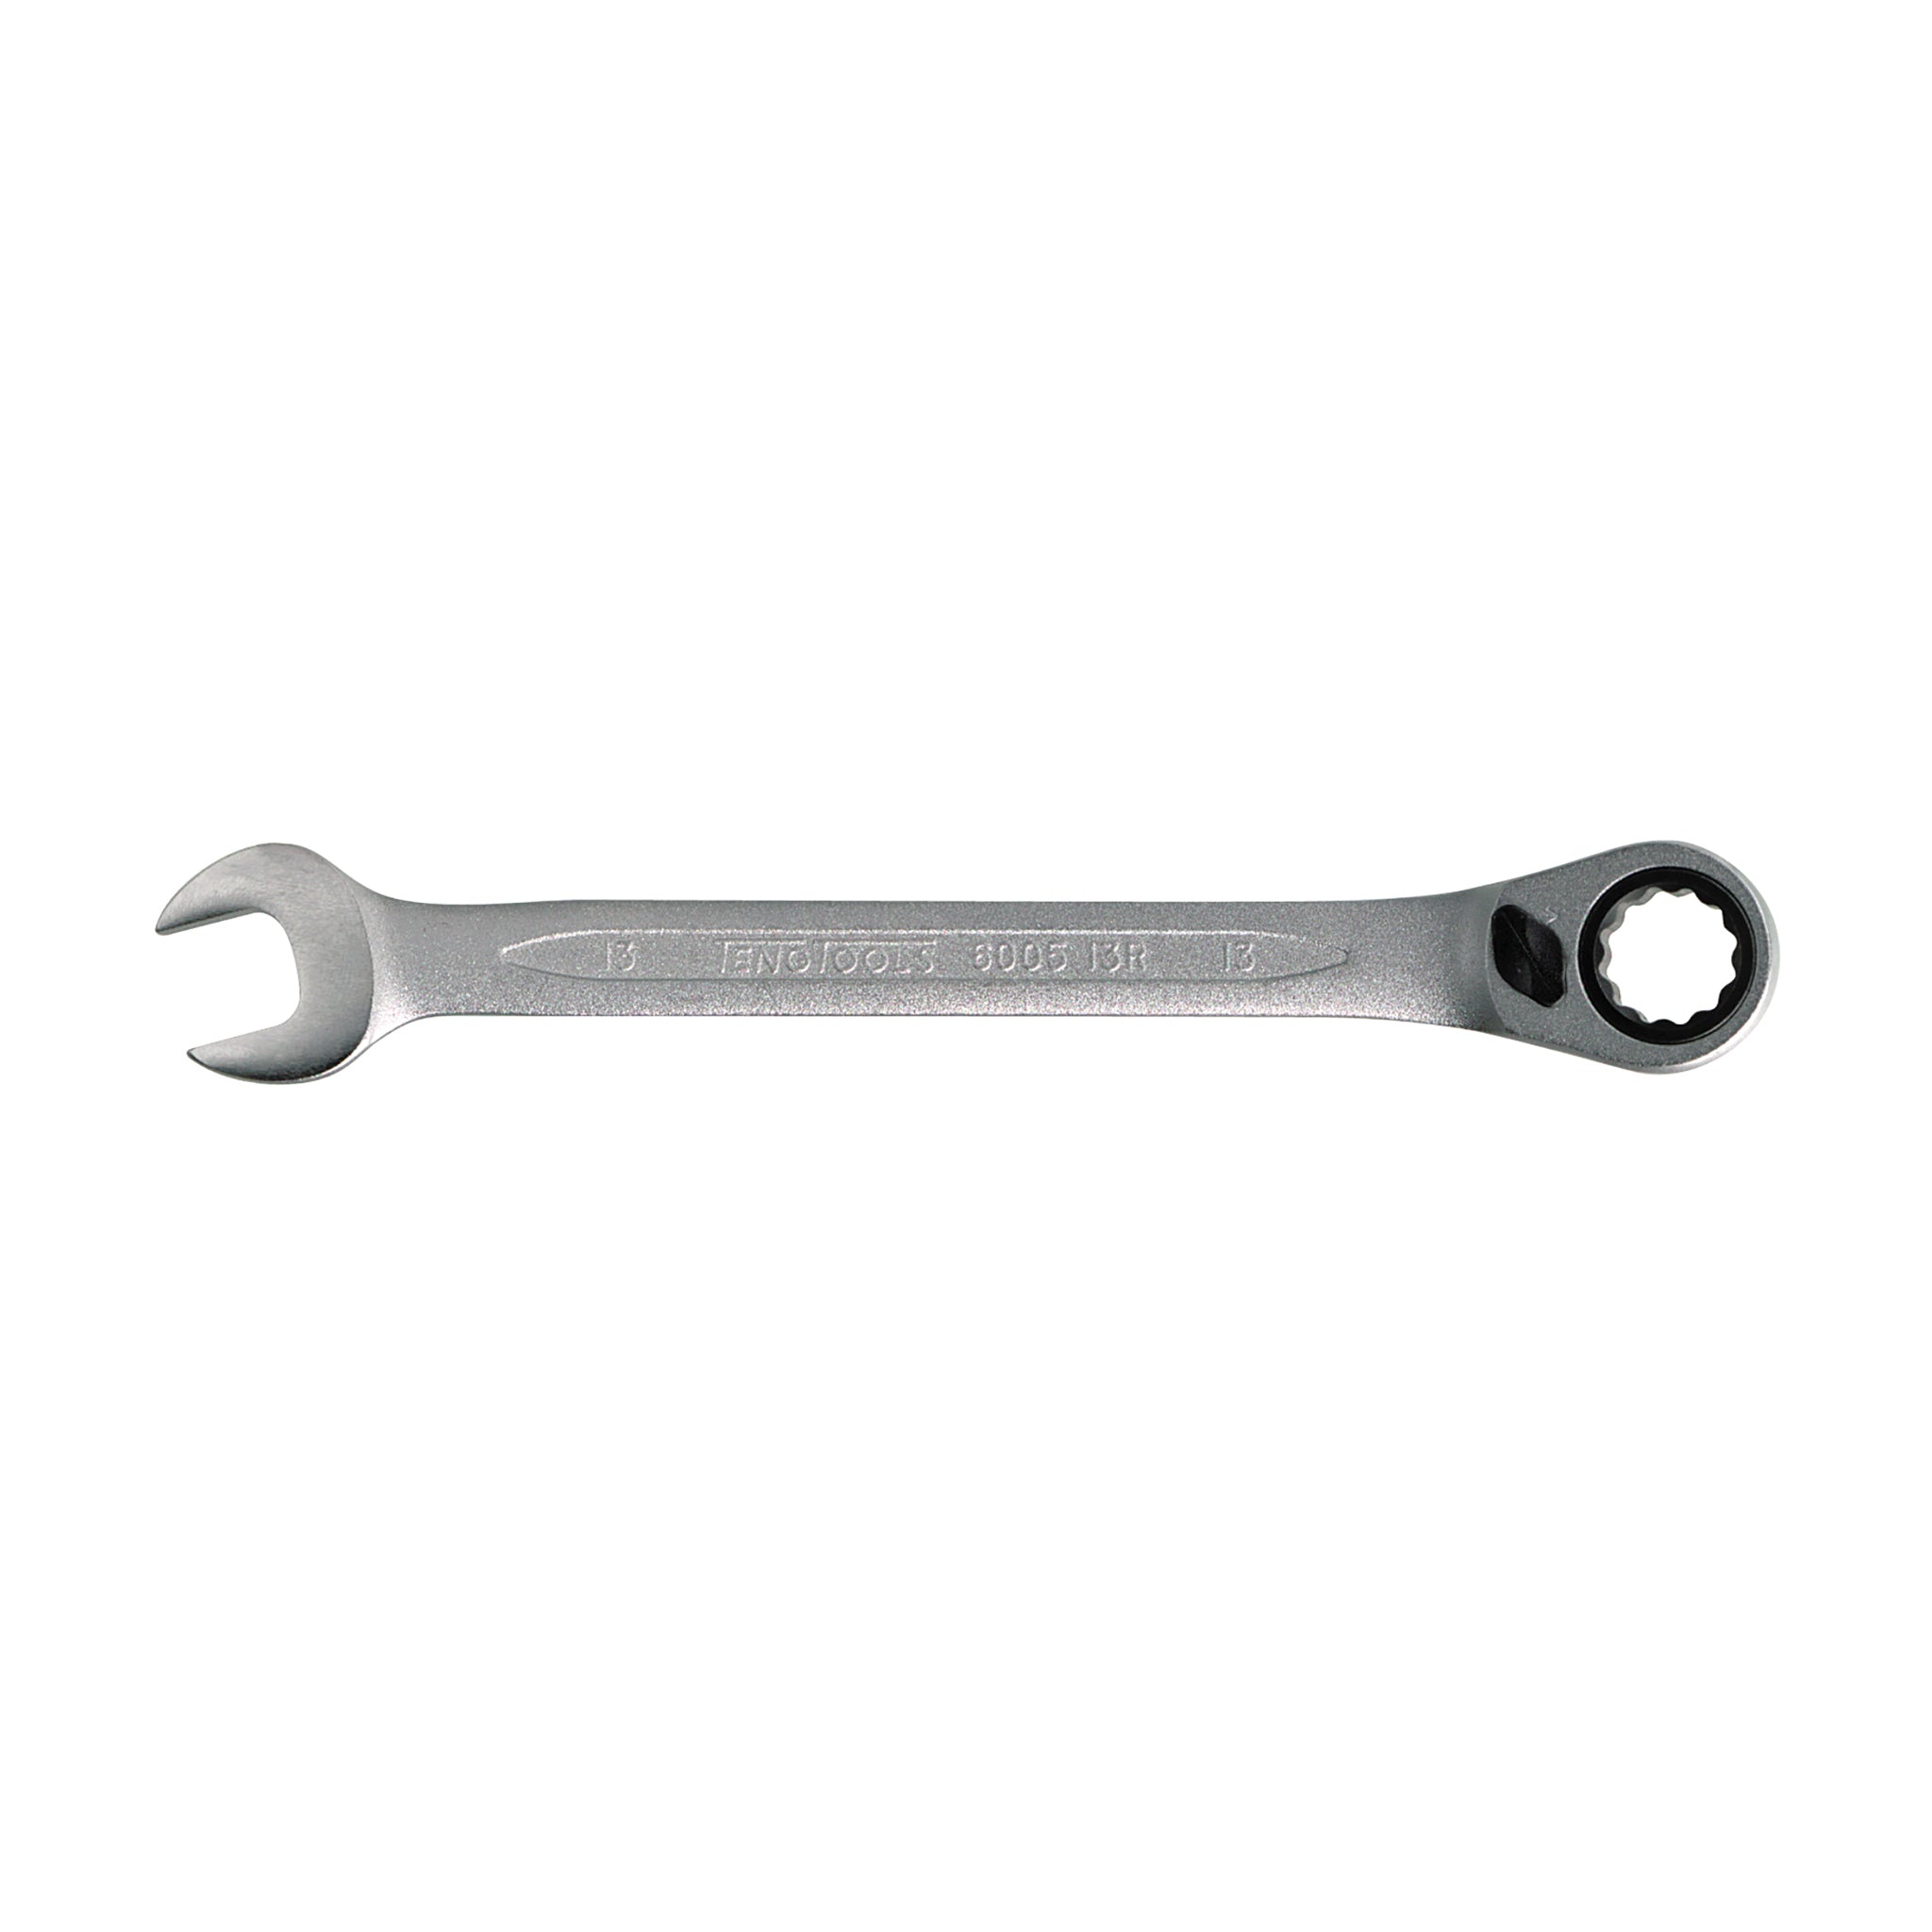 72 Teeth Ratchet Combination Metric Wrenches With Flip Reverse Lever - 30mm